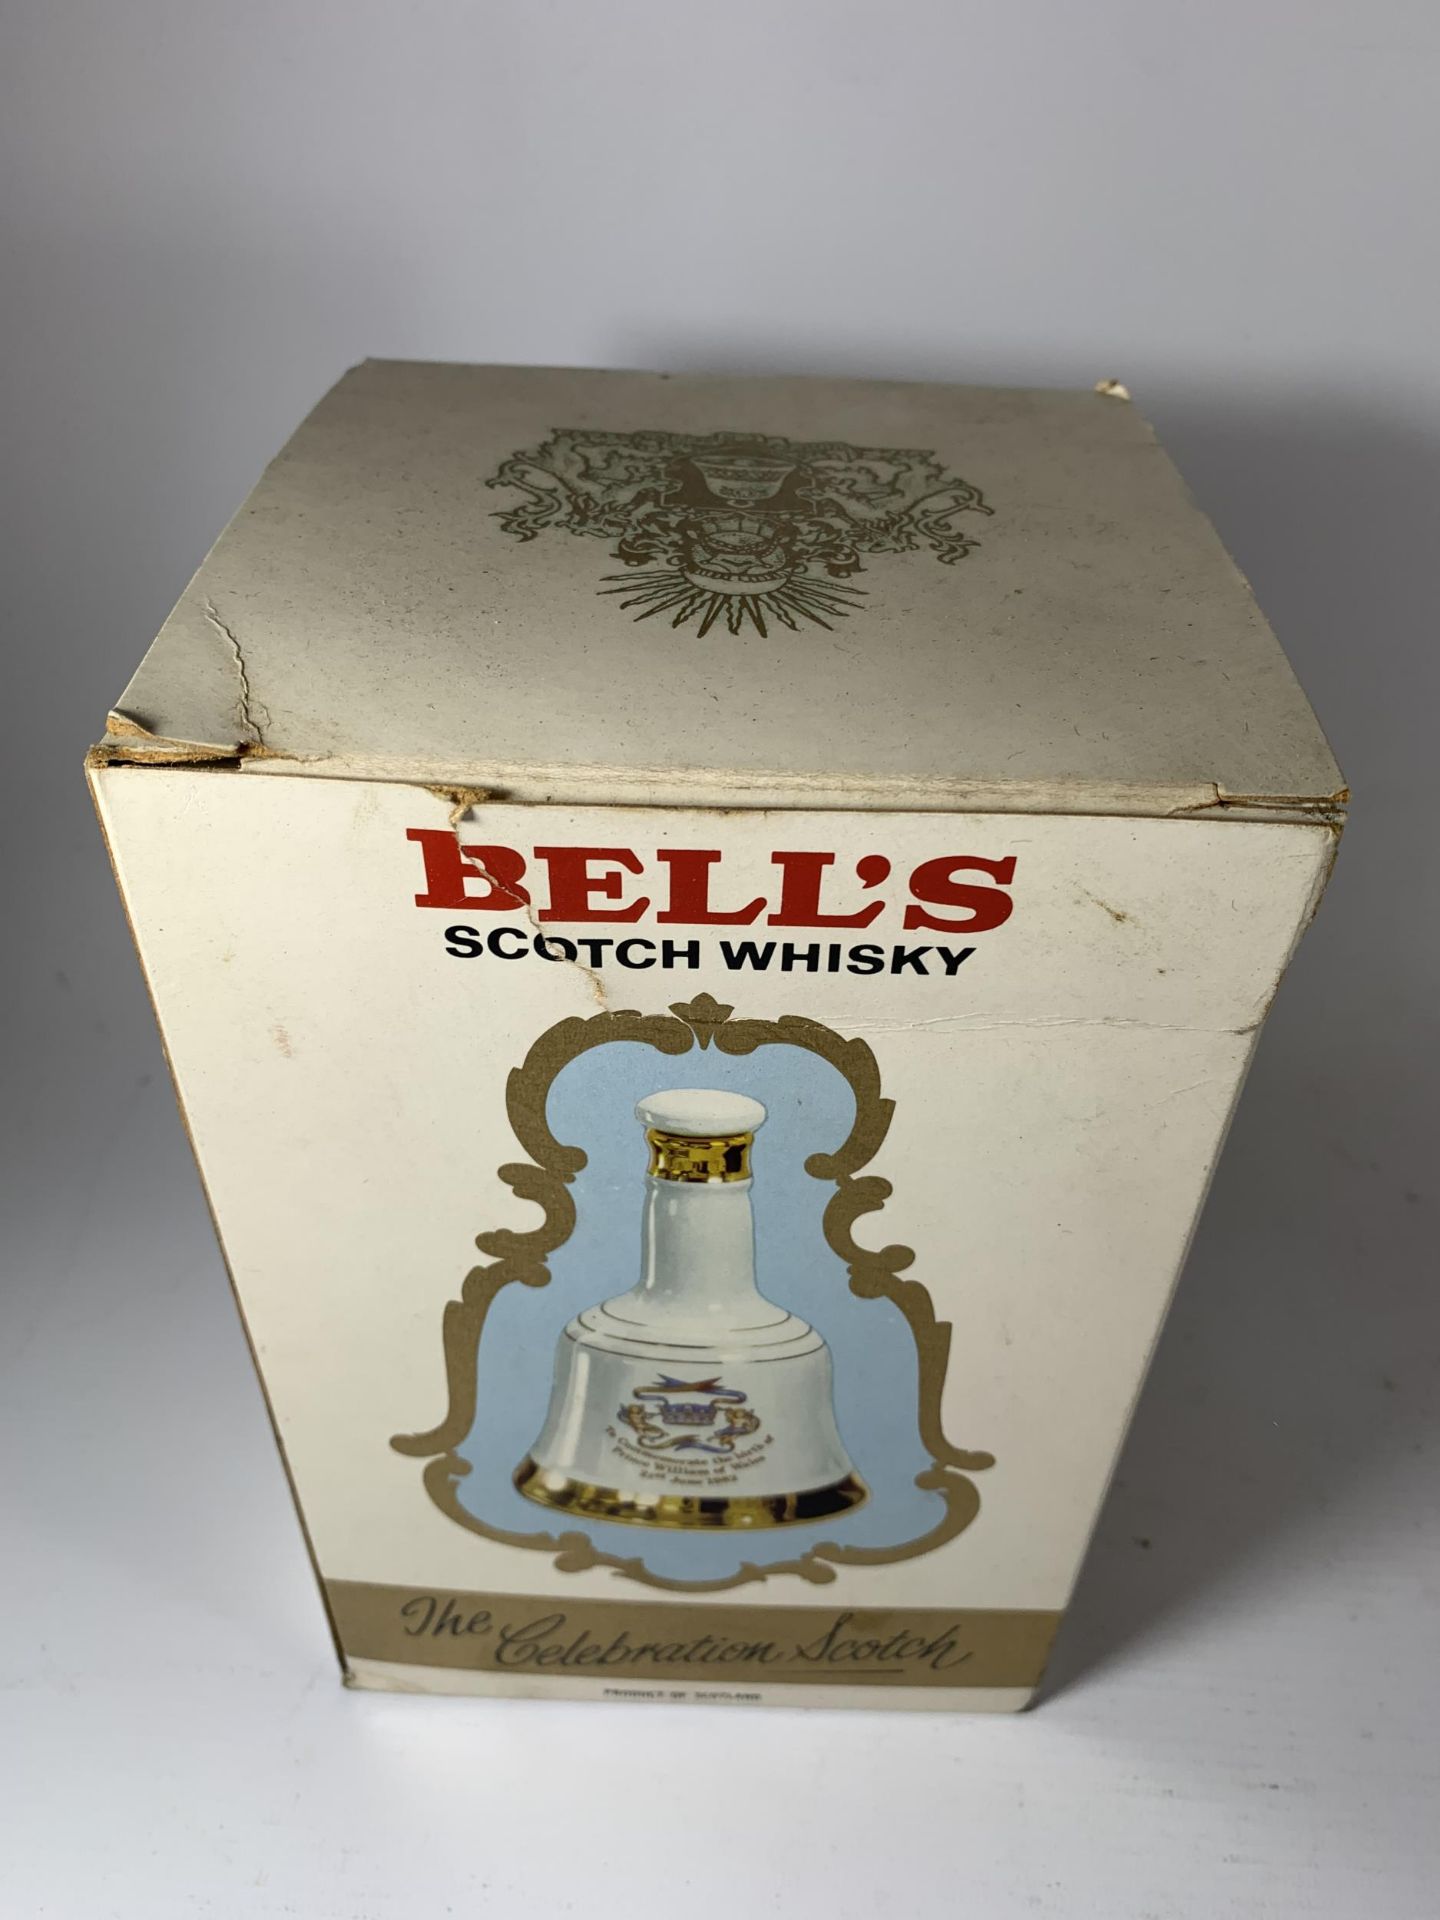 1 X BOXED 50CL BOTTLE - BELLS PRINCE WILLIAM OF WALES 1982 SCOTCH WHISKY - Image 3 of 3